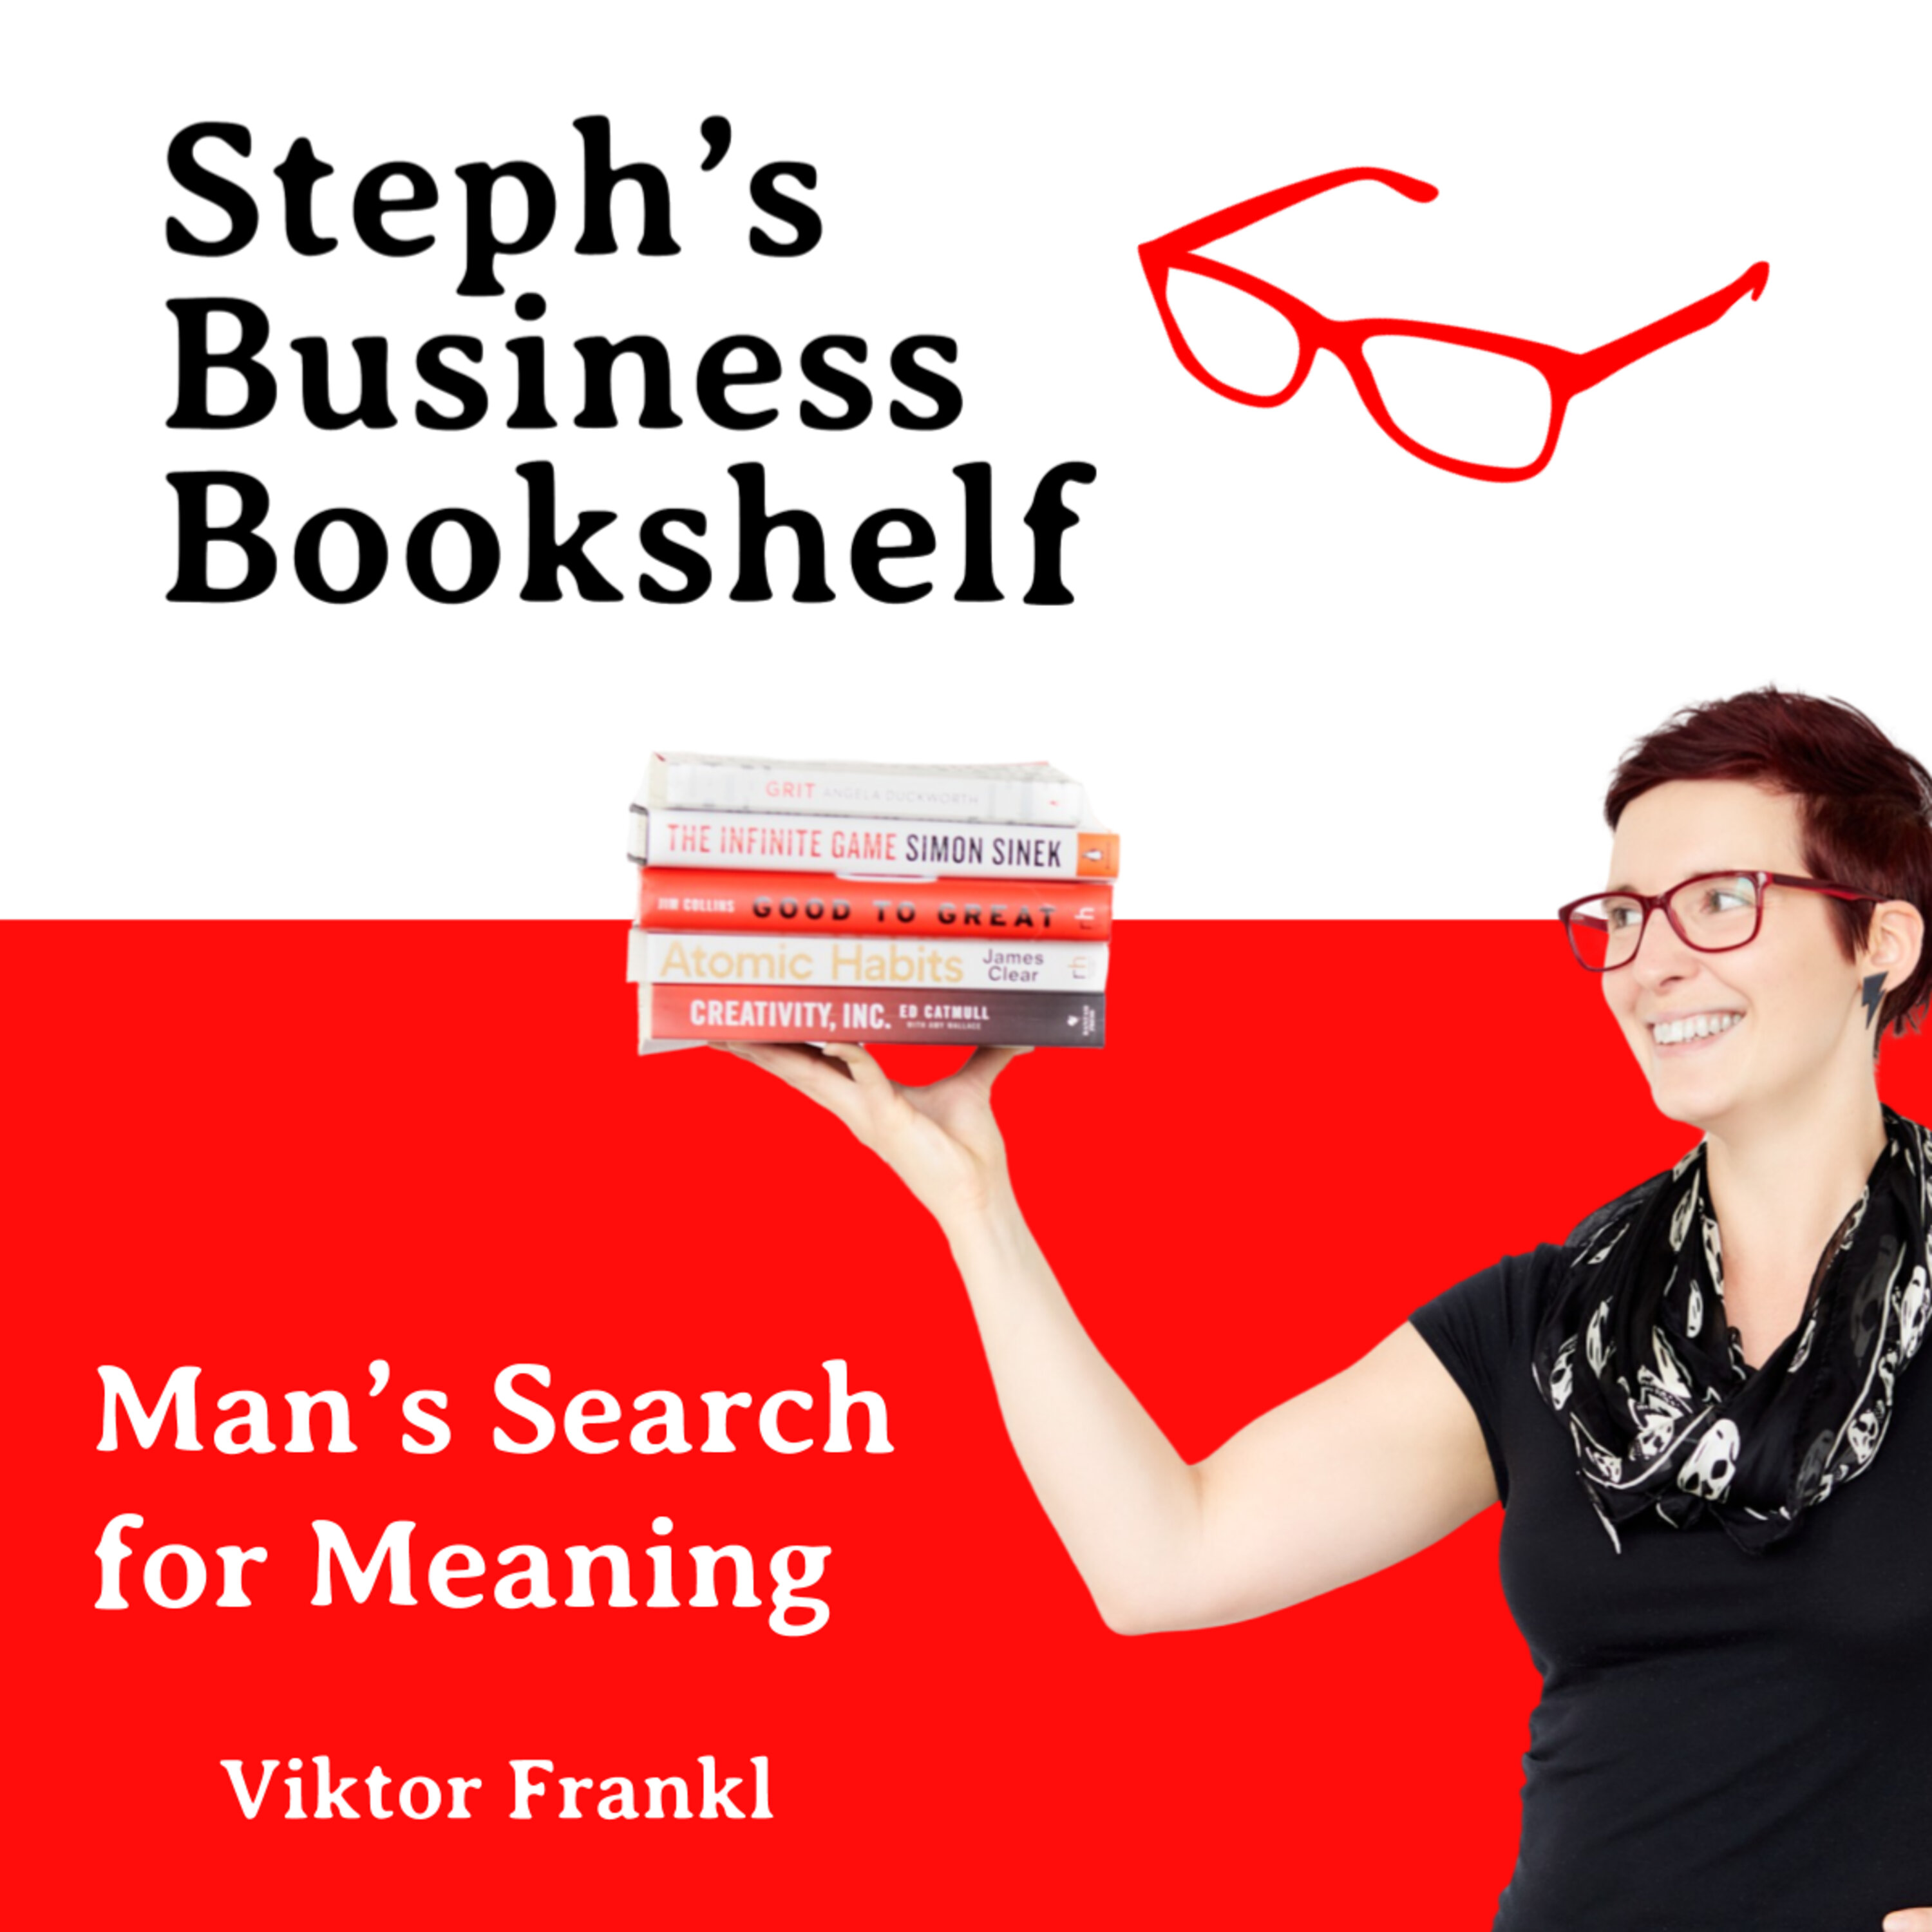 Man’s Search for Meaning by Viktor Frankl: What is the meaning of life?